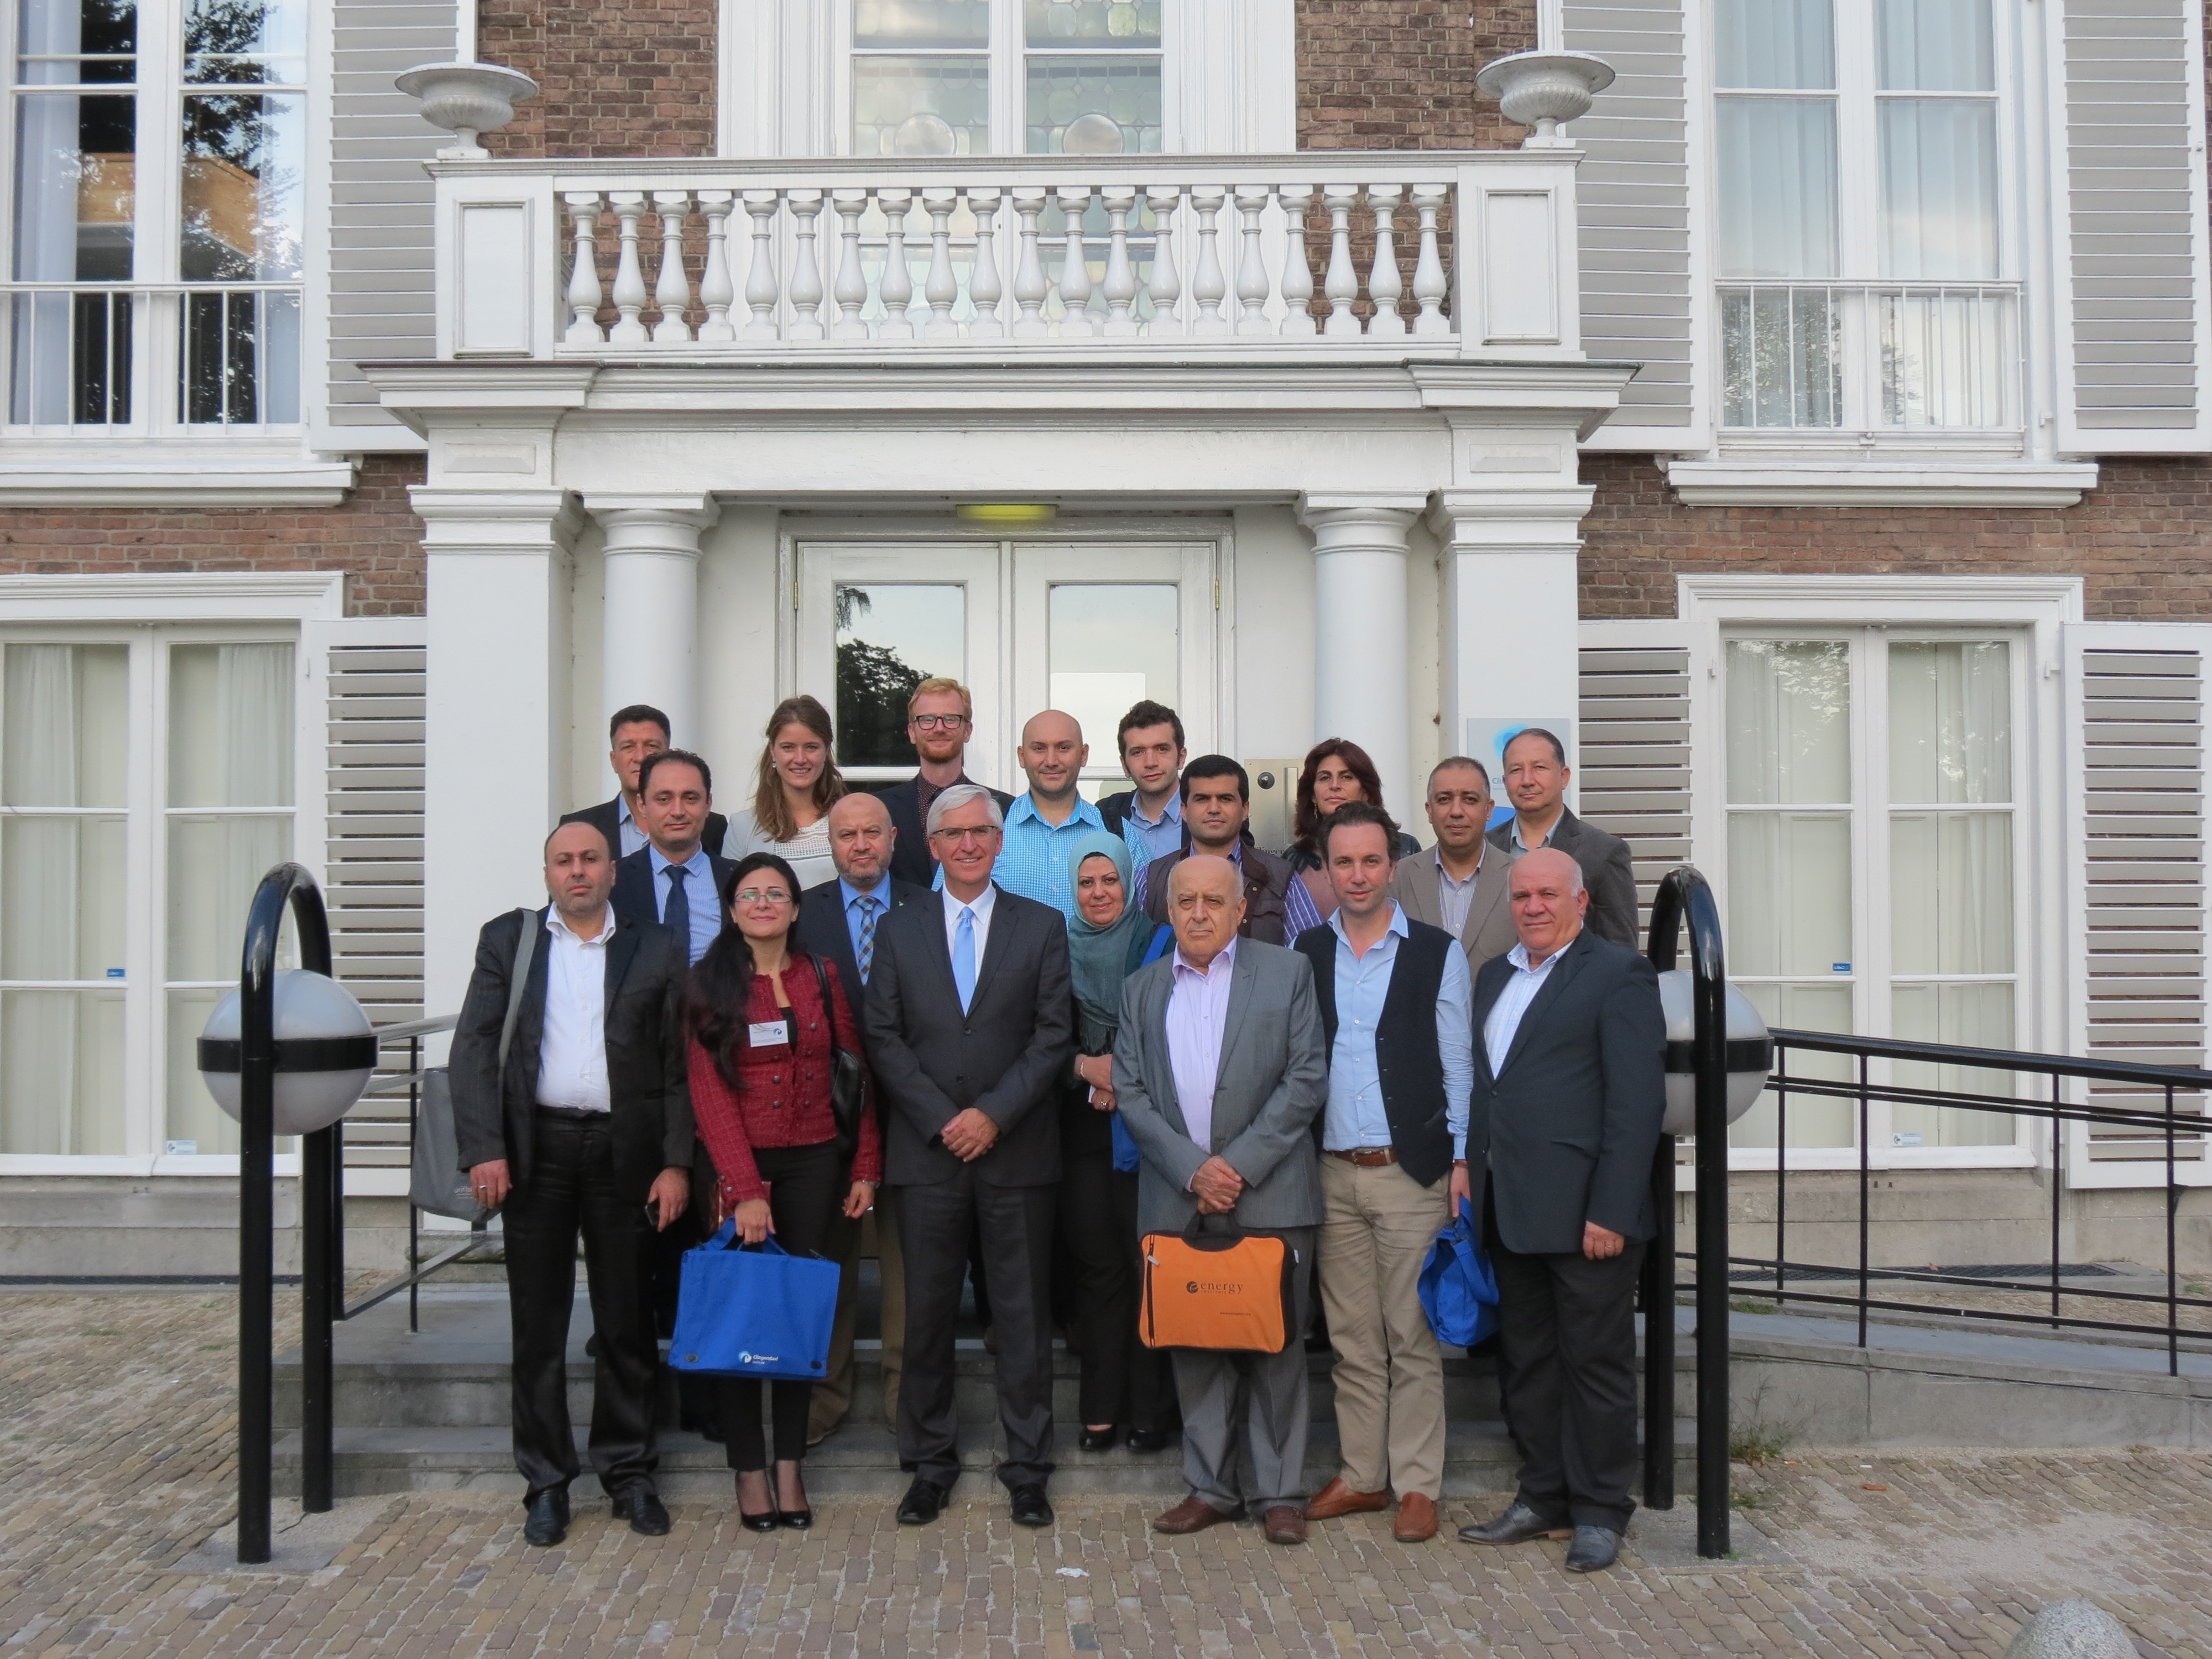 Participants together with Mr Ron Ton, Hans Wurzer and Mara van der Meer, in front of the Clingendael Institute